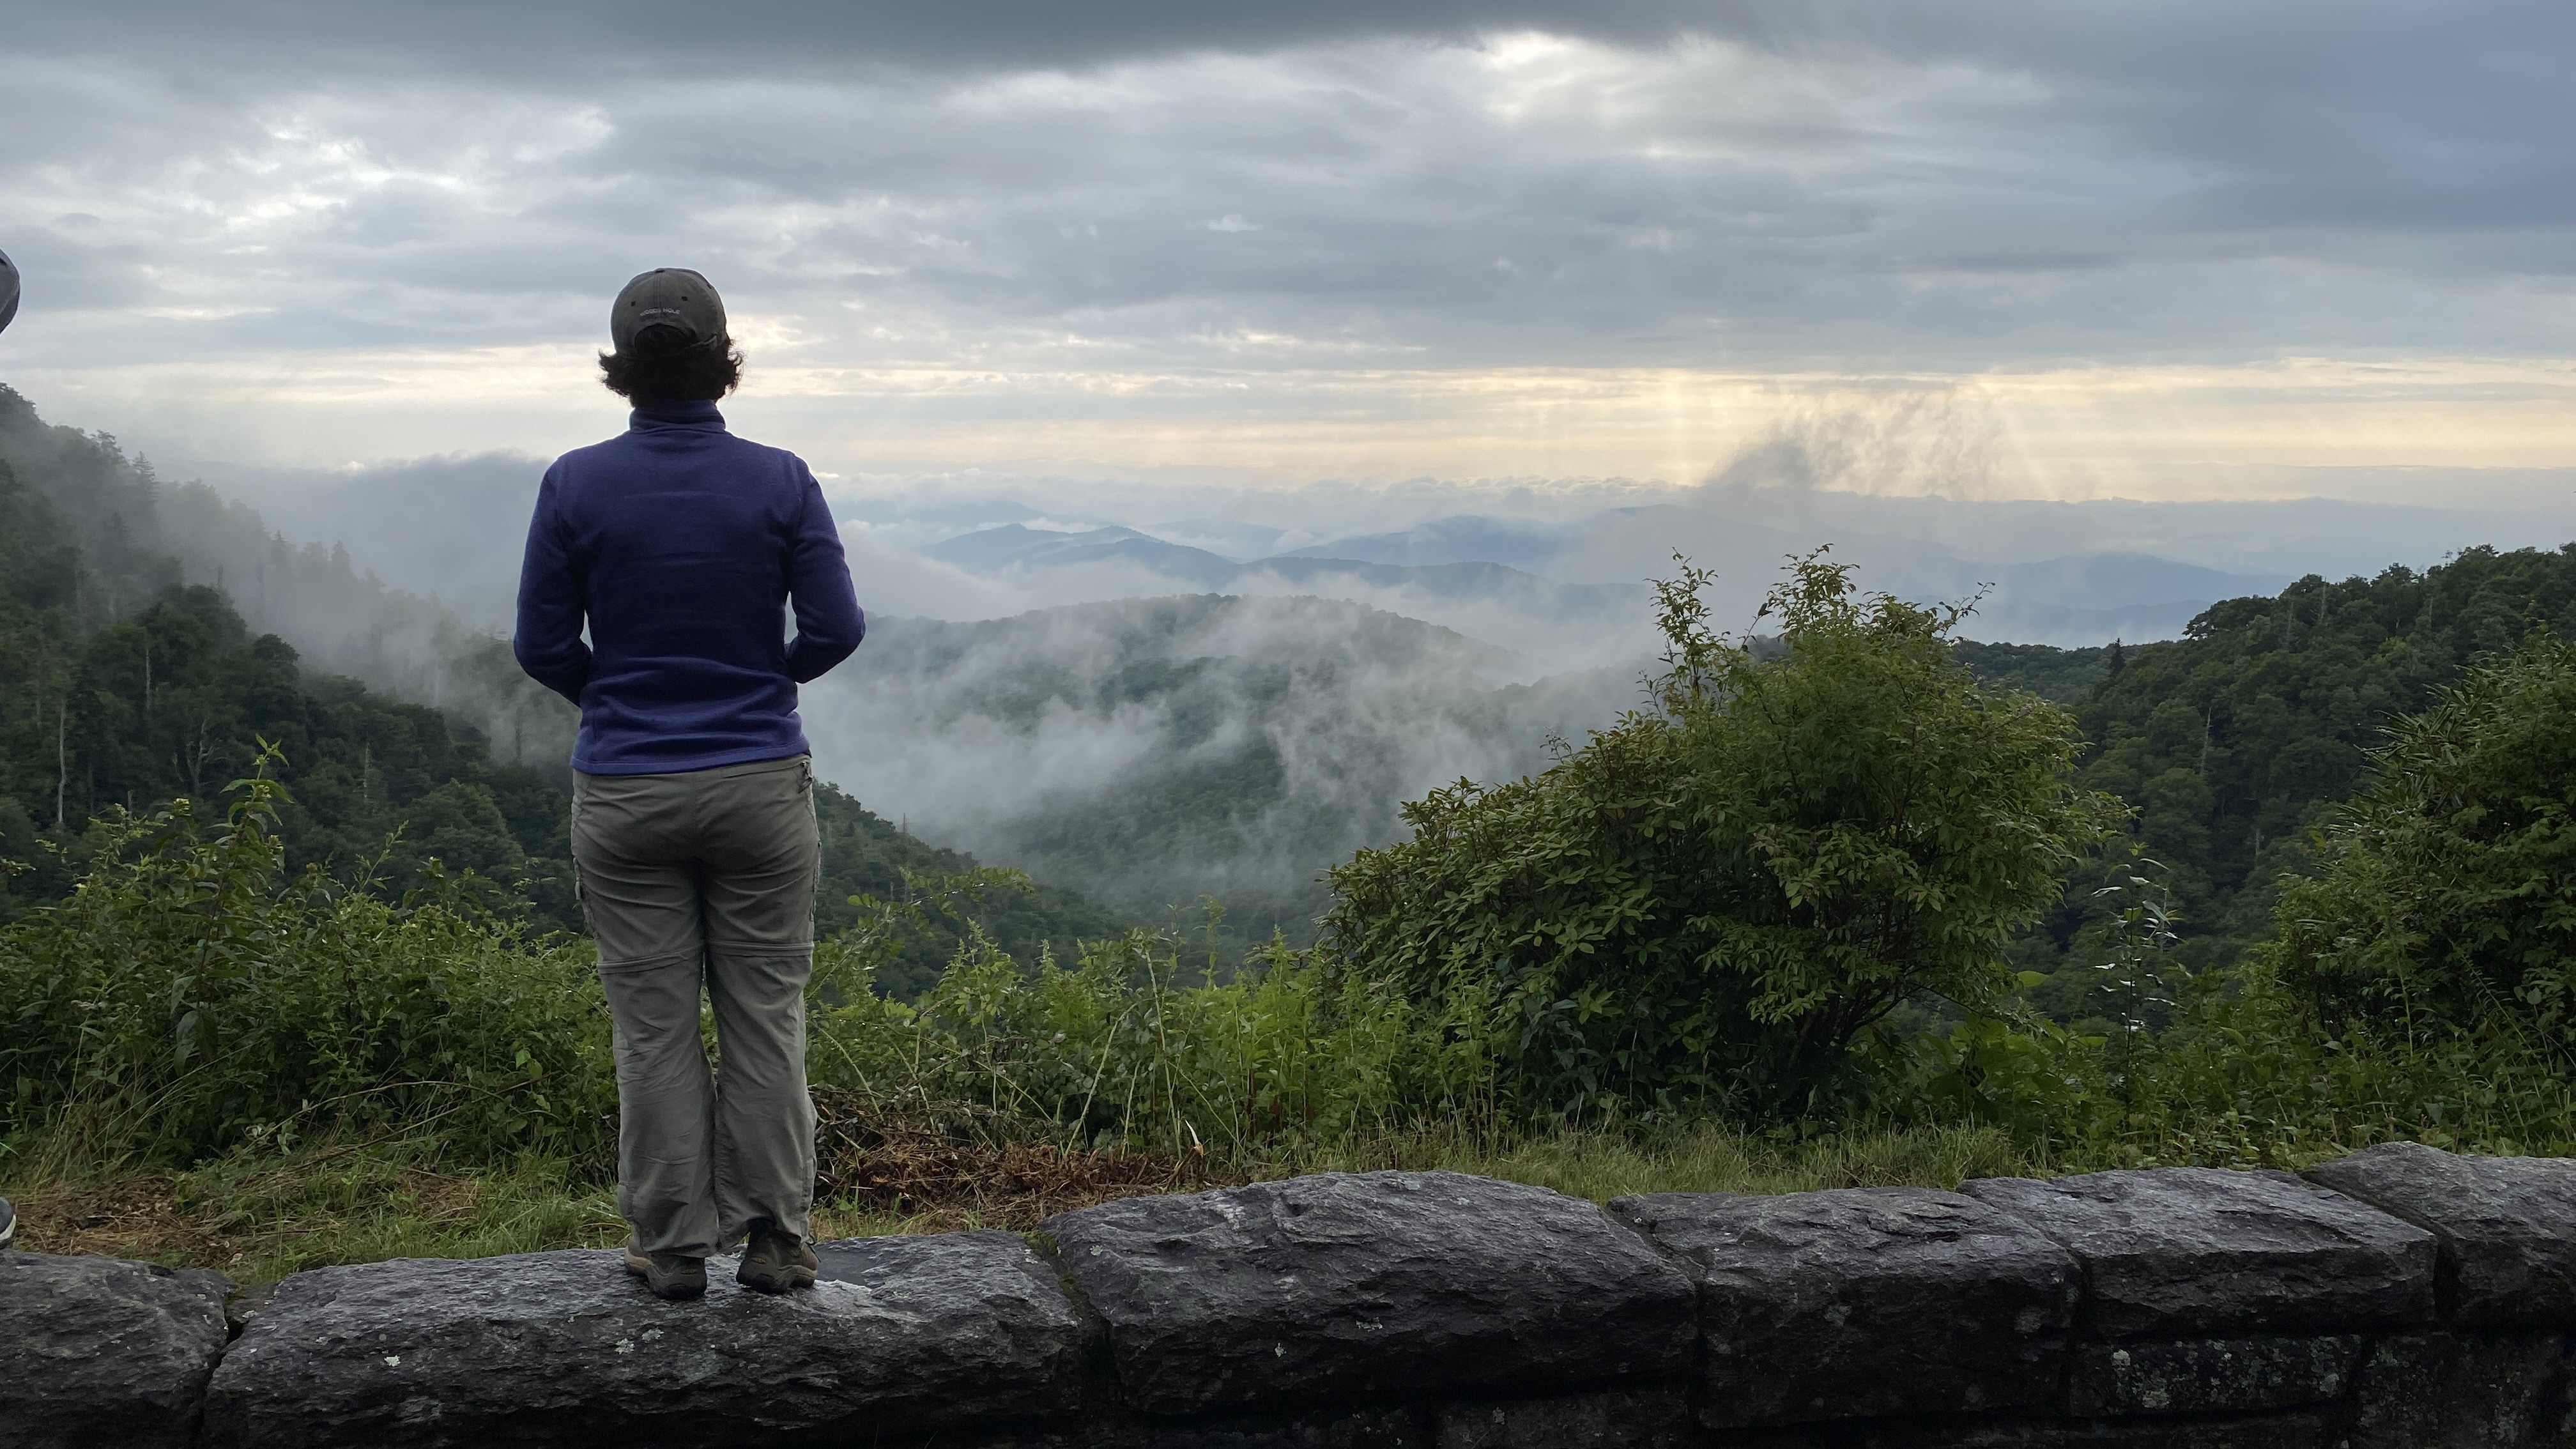 Silhouetted person overlooking mountains and mist